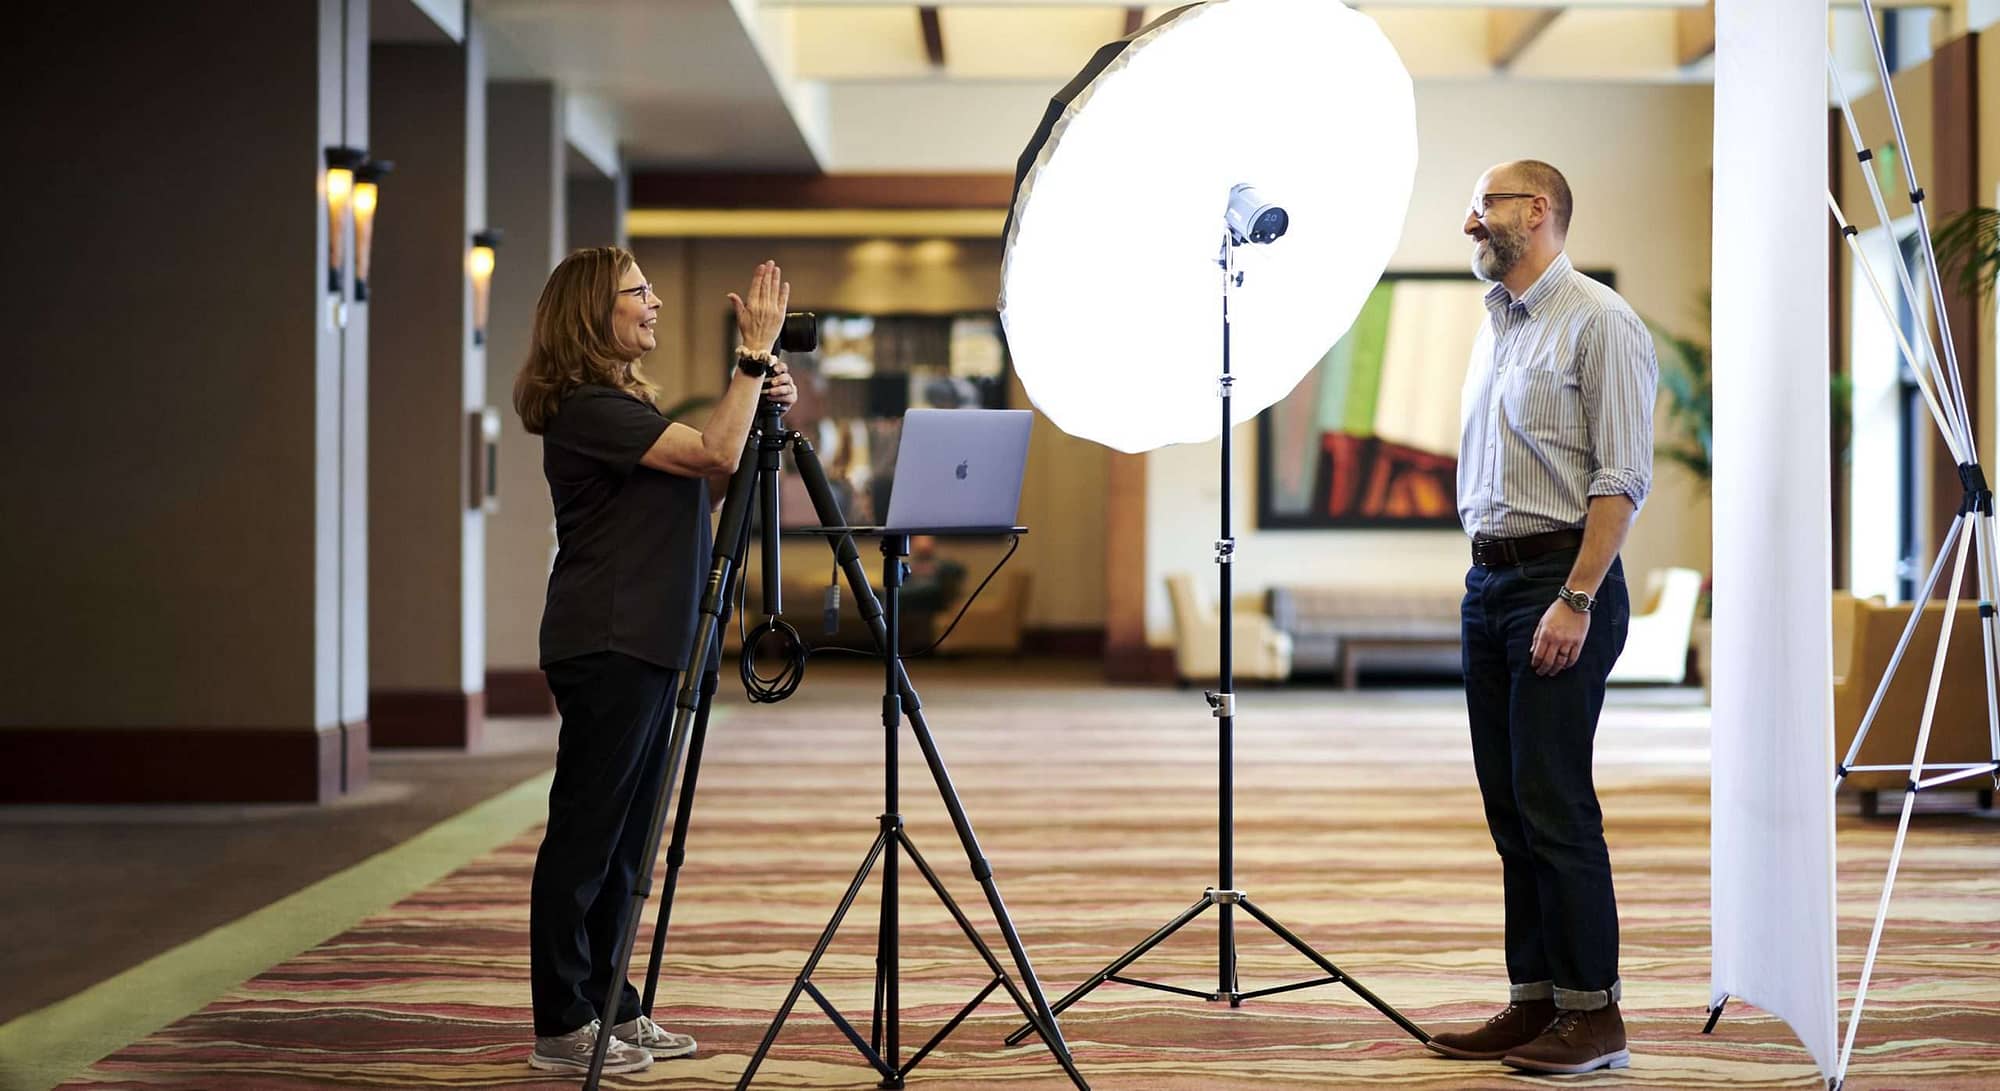 Image of a man getting a headshot at a event at a hotel